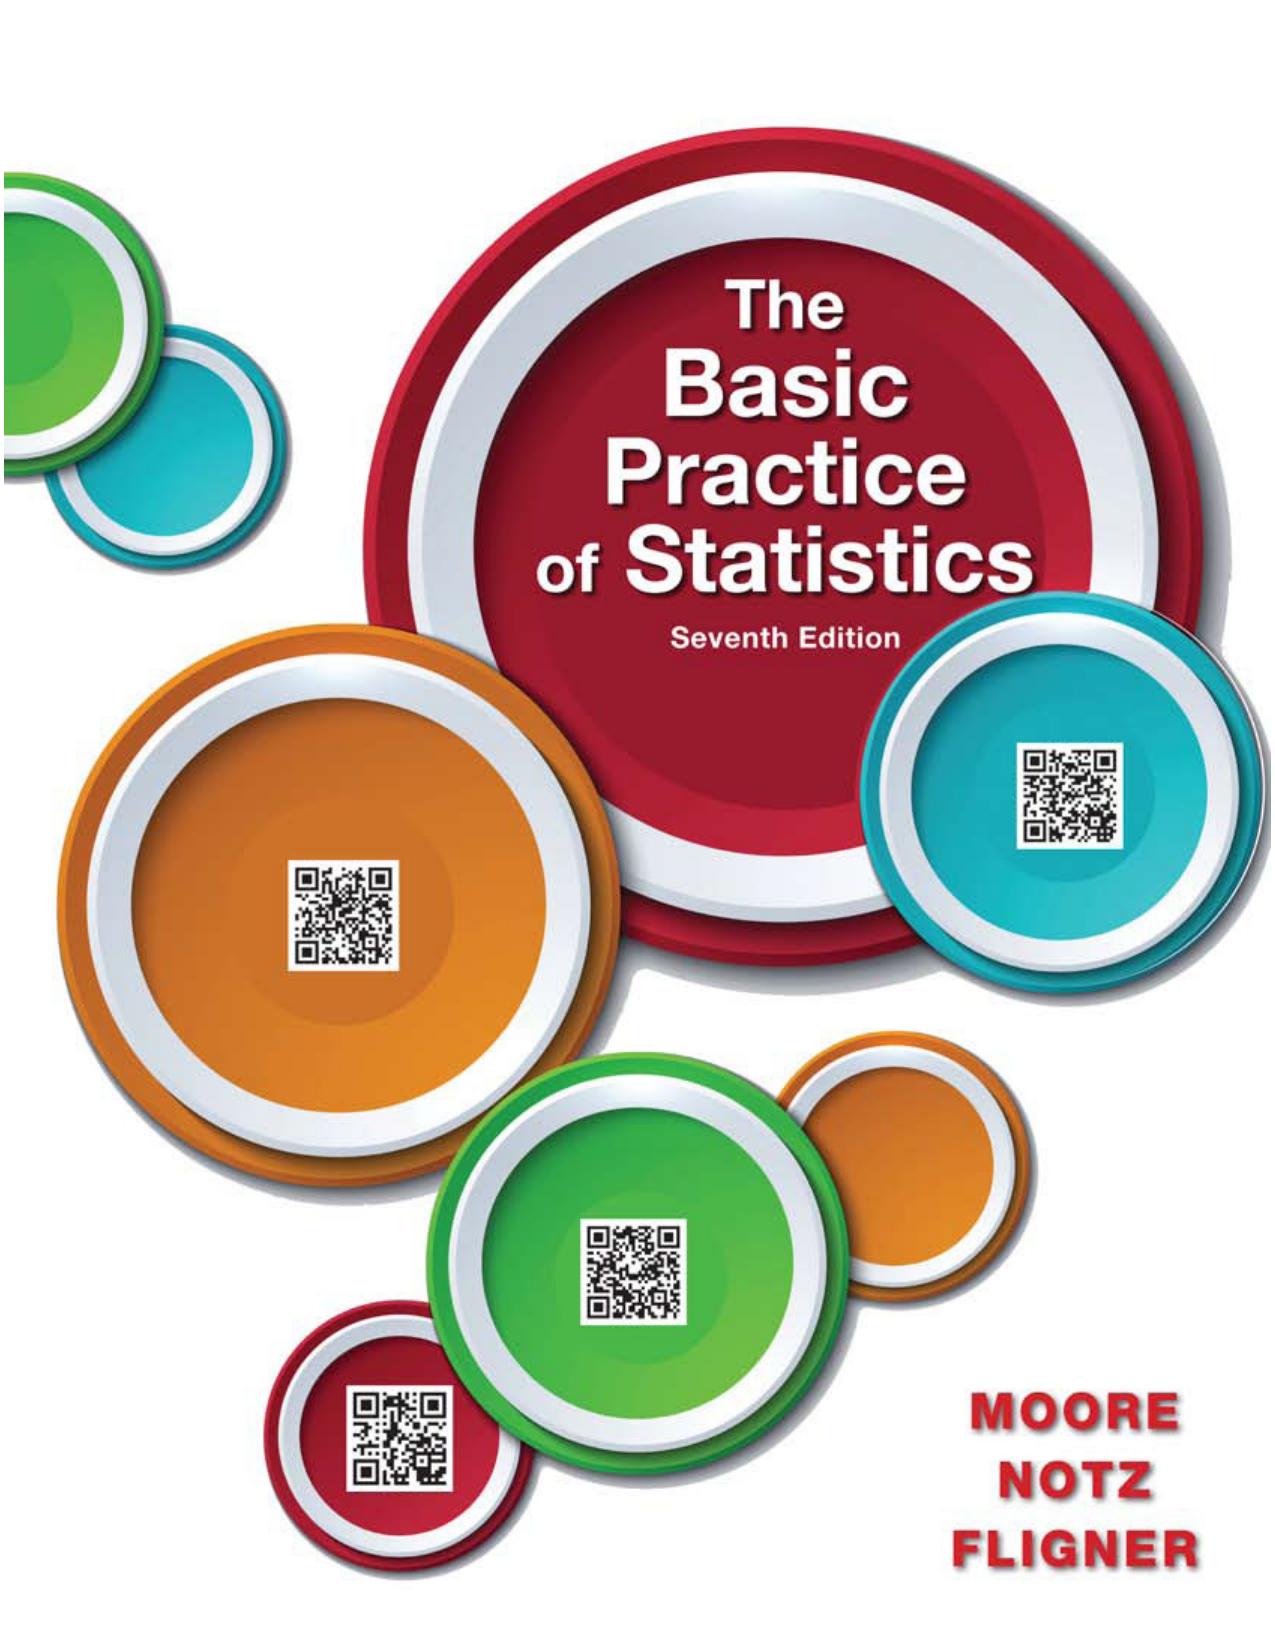 The Basic Practice of Statistics, SEVENTH EDITION